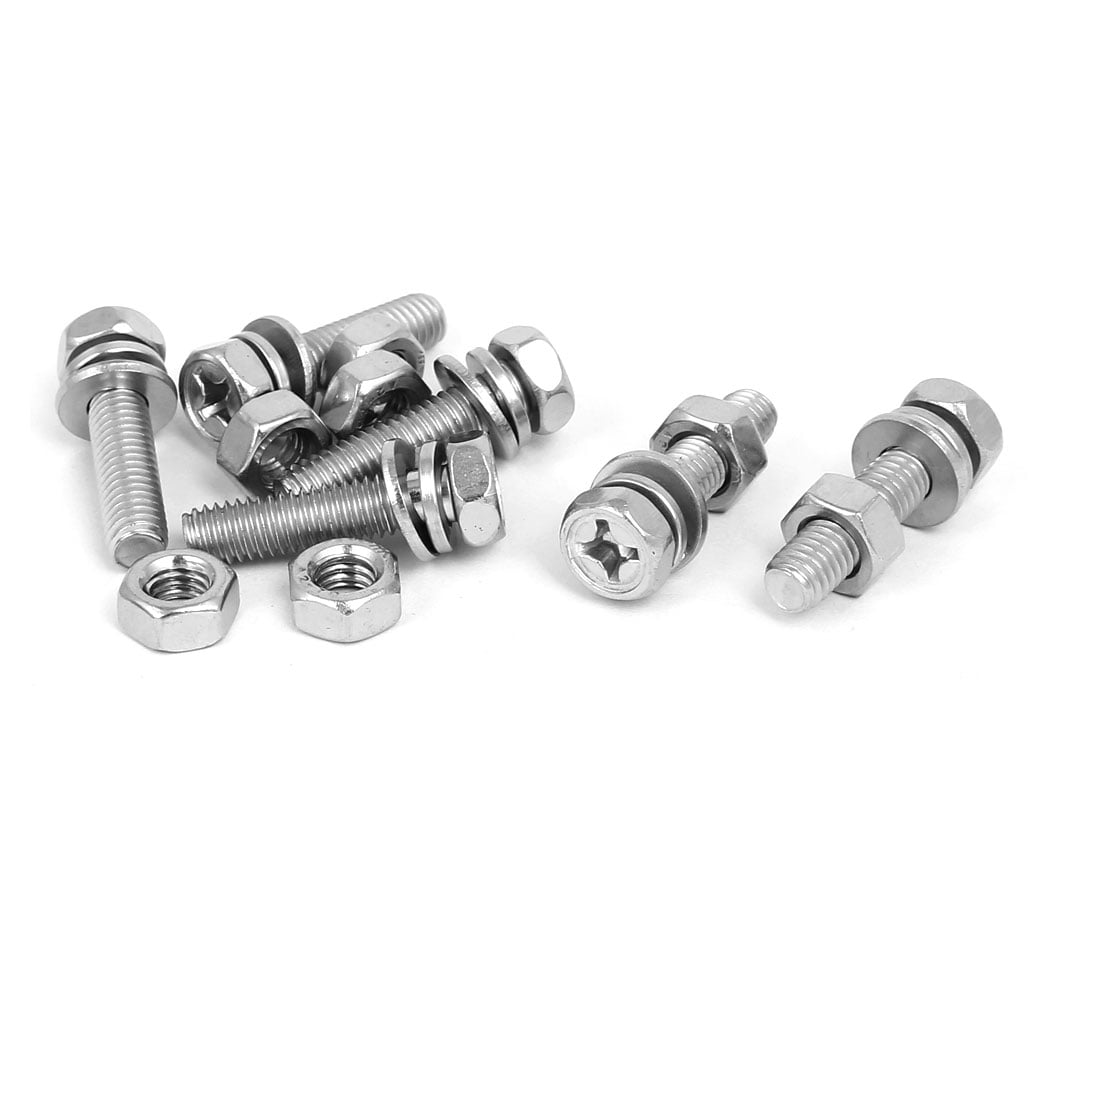 M6 304 A2 Stainless Steel Hexagon Screw Bolts+Nut+Flat Washer+Spring Washer Kit 